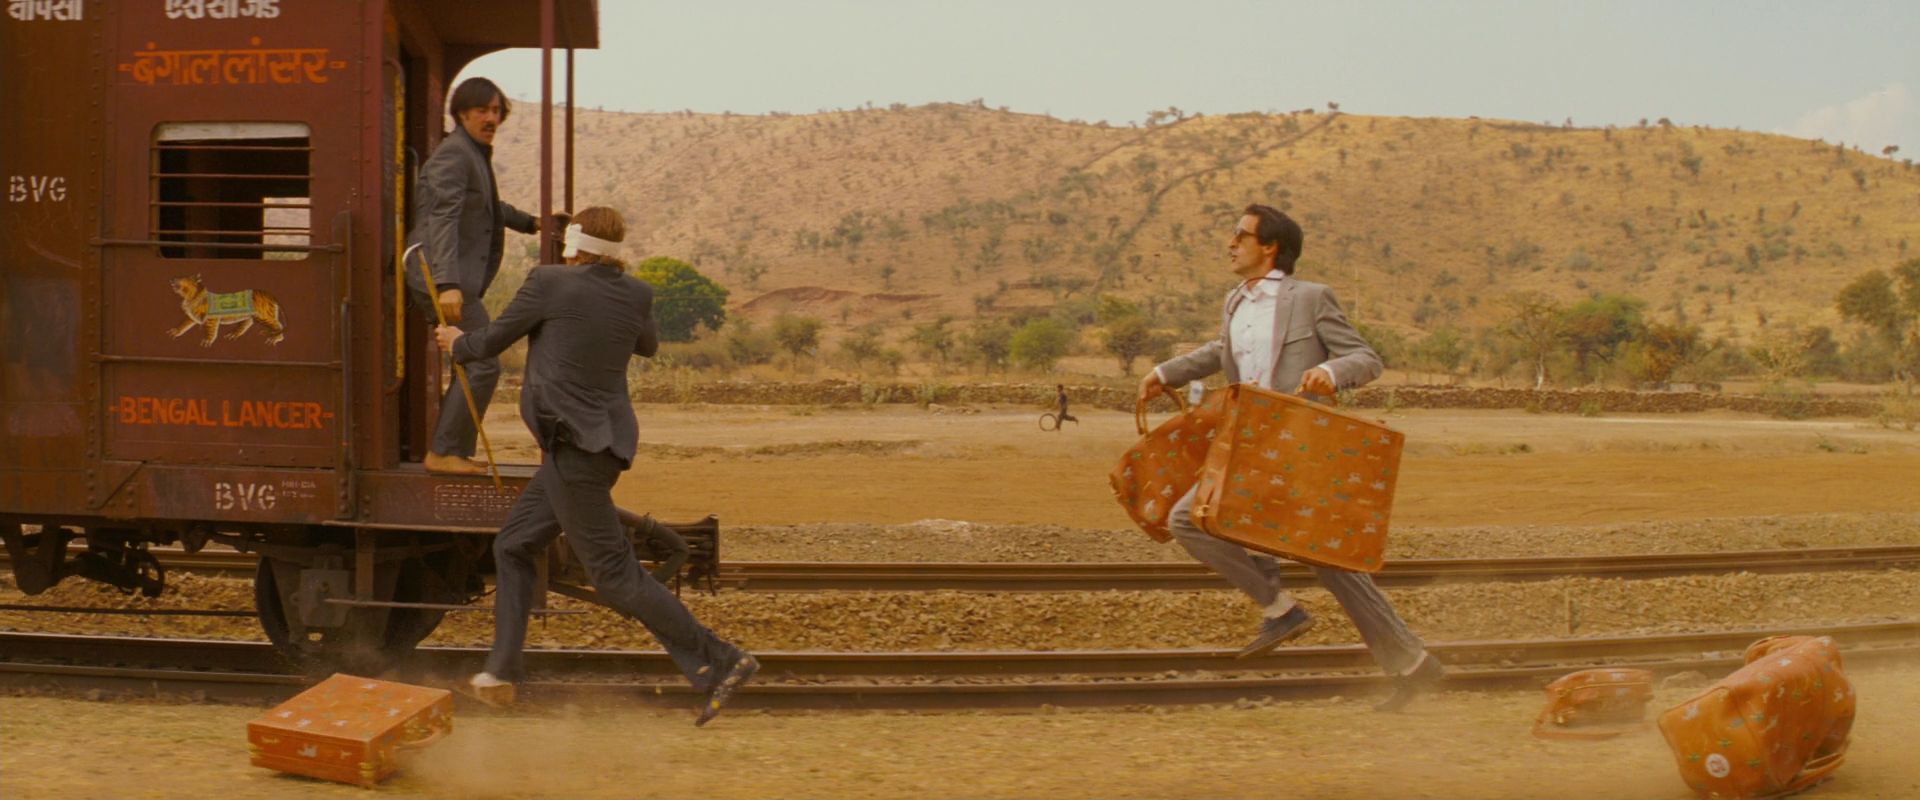 The Official Trailer for The Darjeeling Limited 